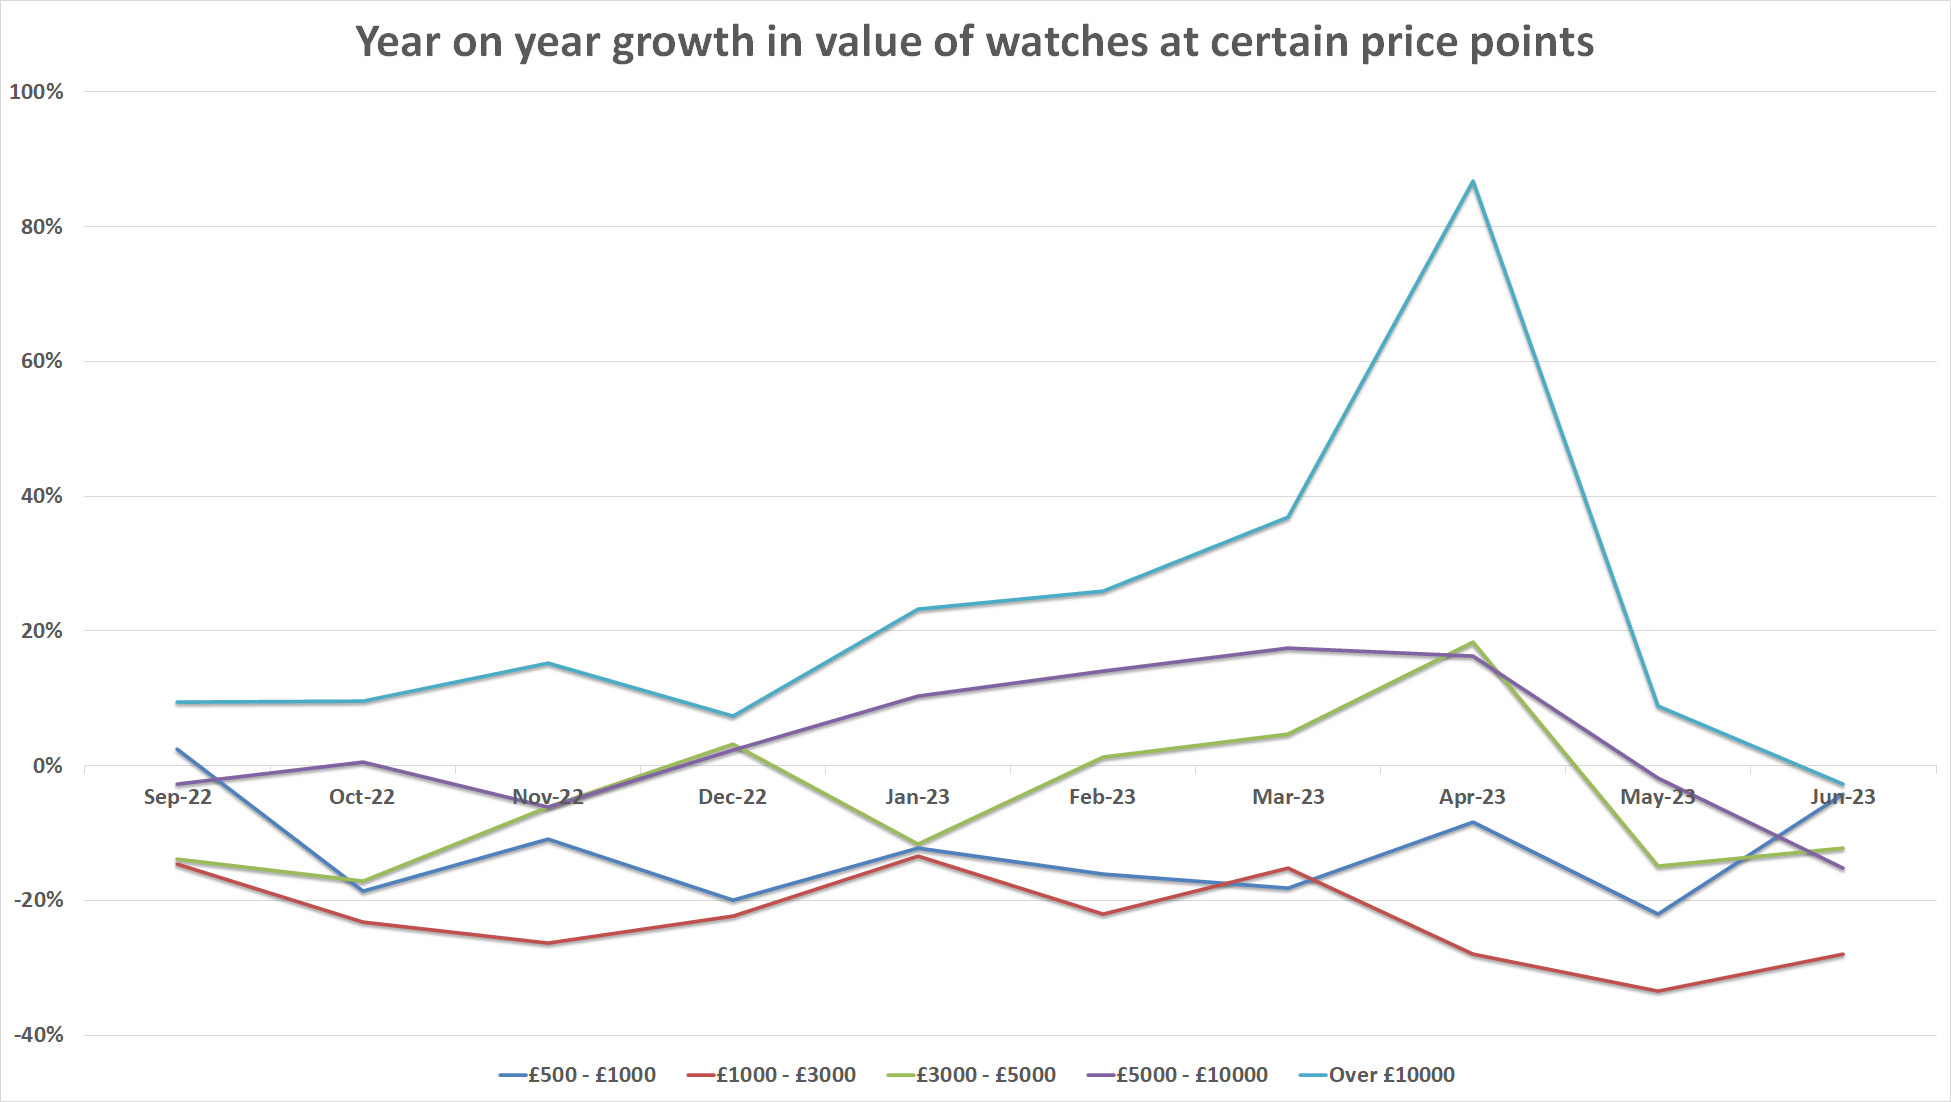 Gfk year on year growth at certain price points